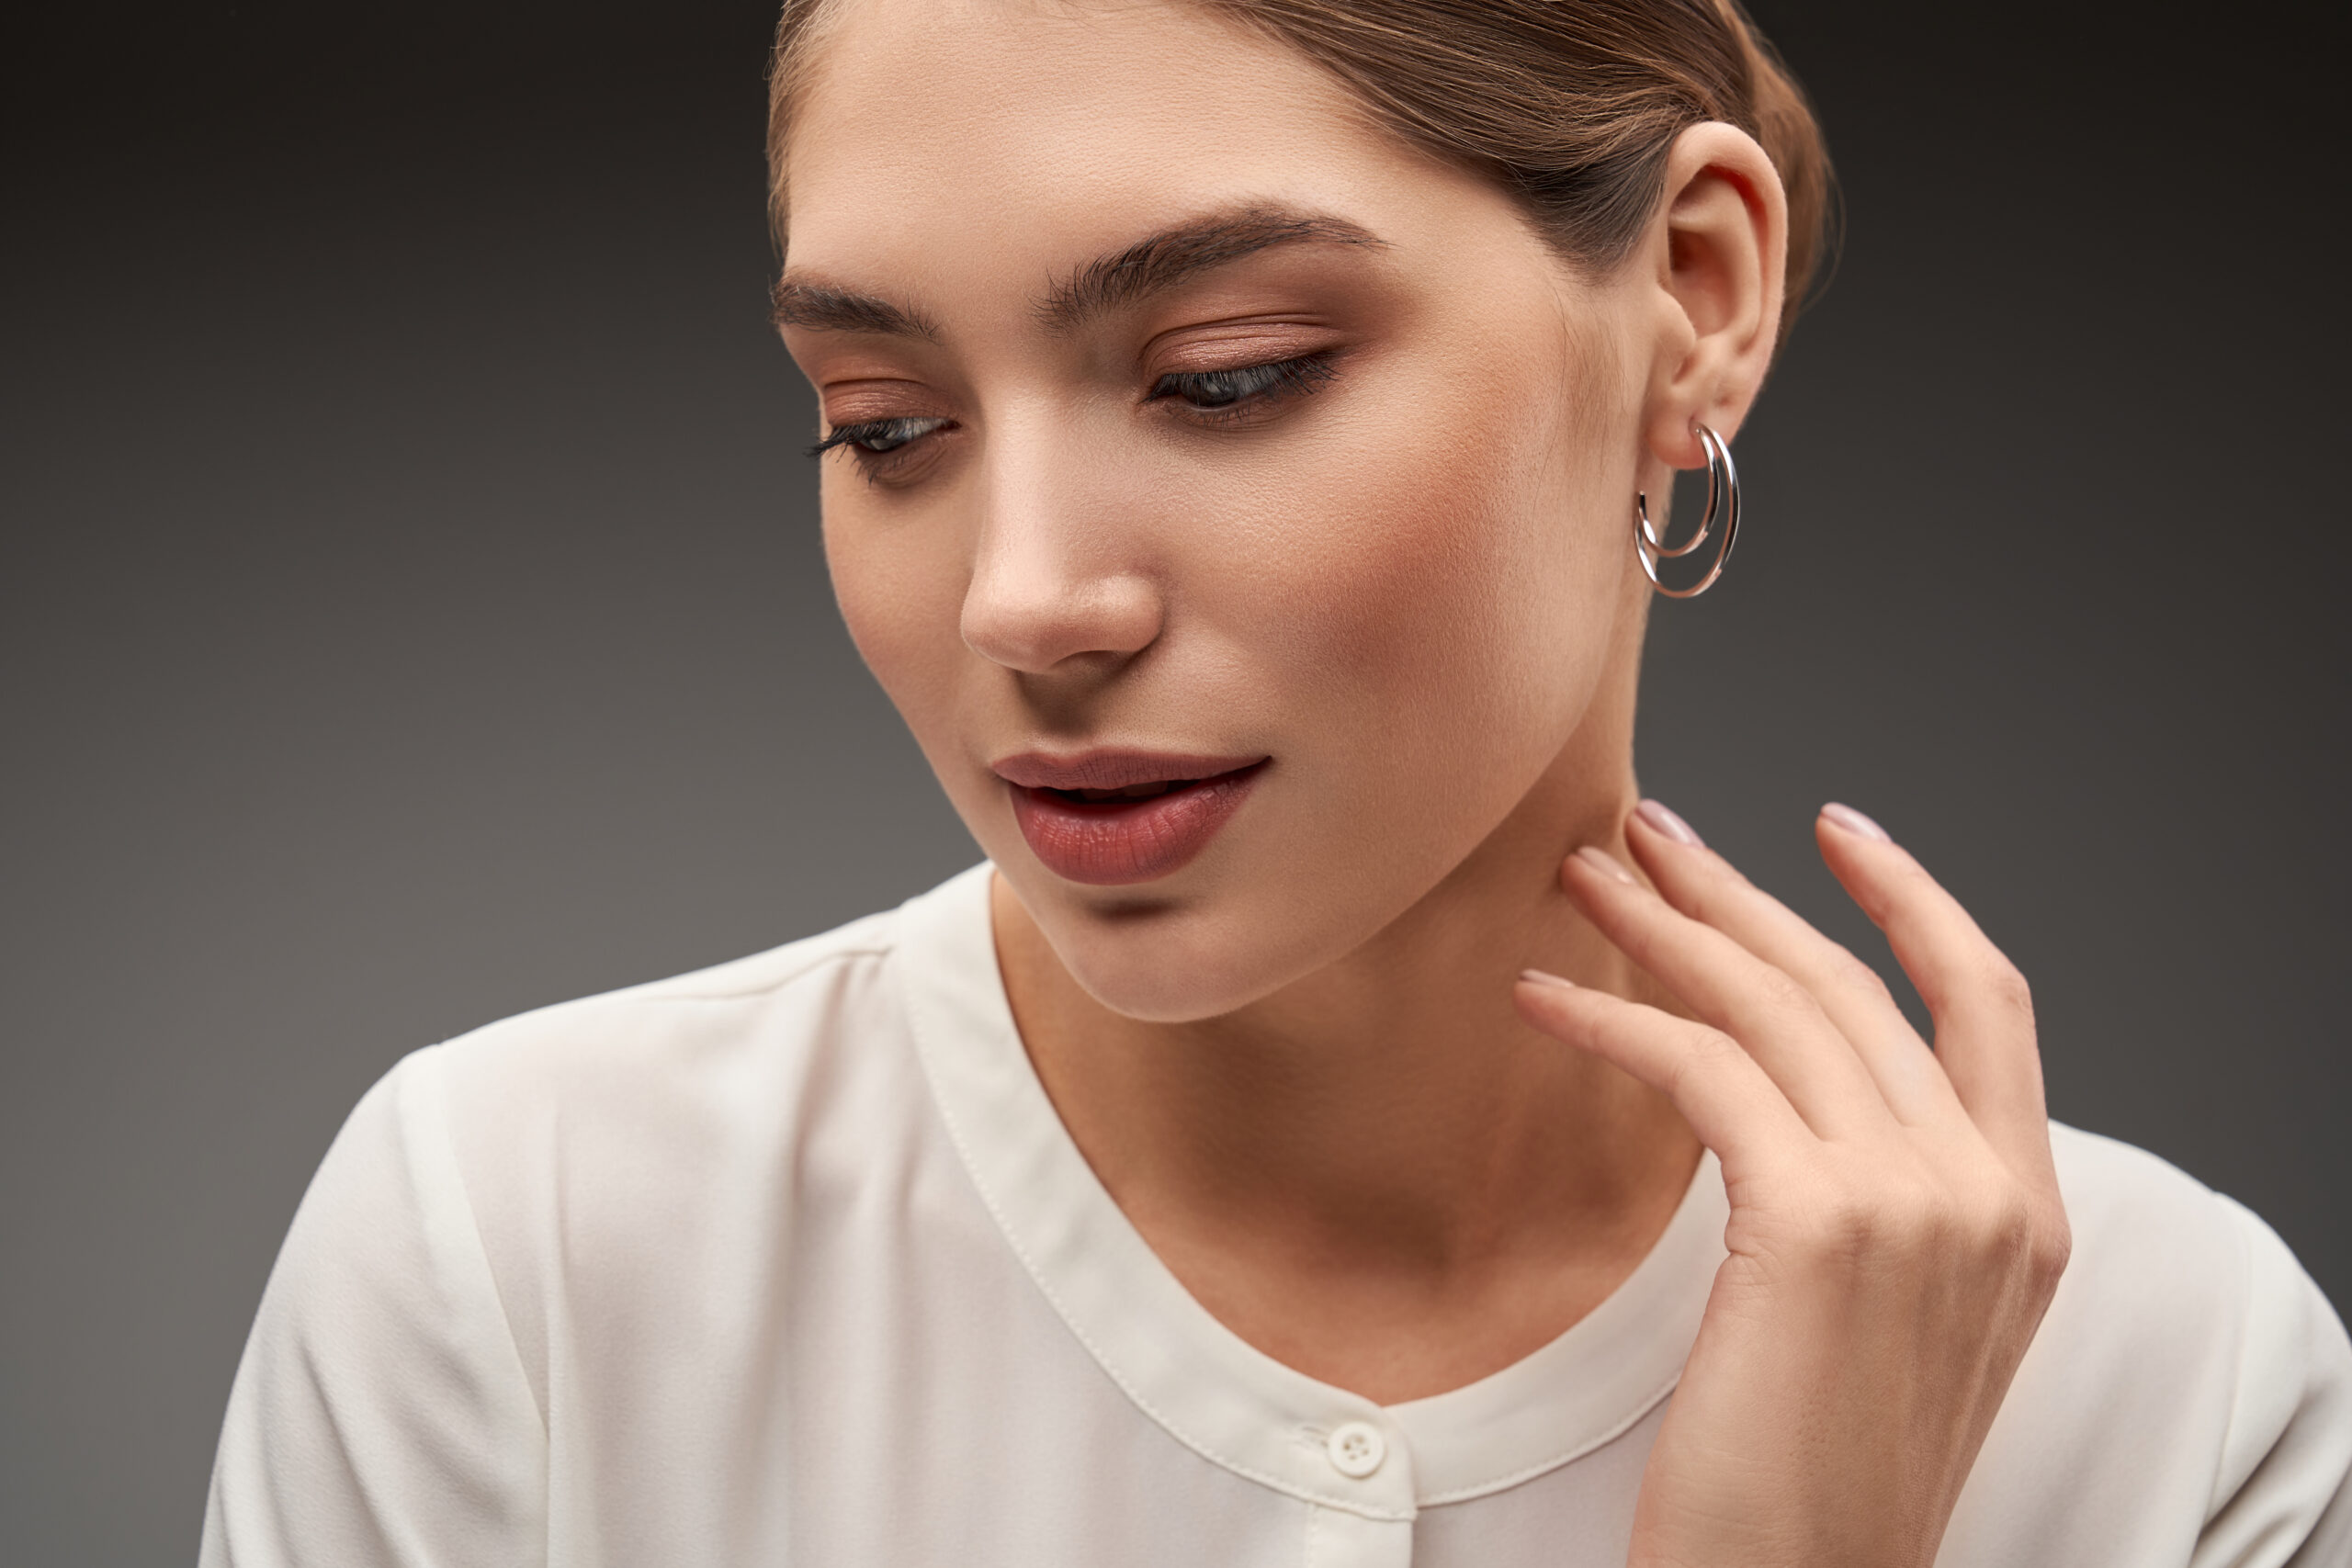 Close up portrait of young beautiful brunette female model presenting silver earrings. Front view of woman with clean skin posing, isolated on studio background. Concept of jewelry.